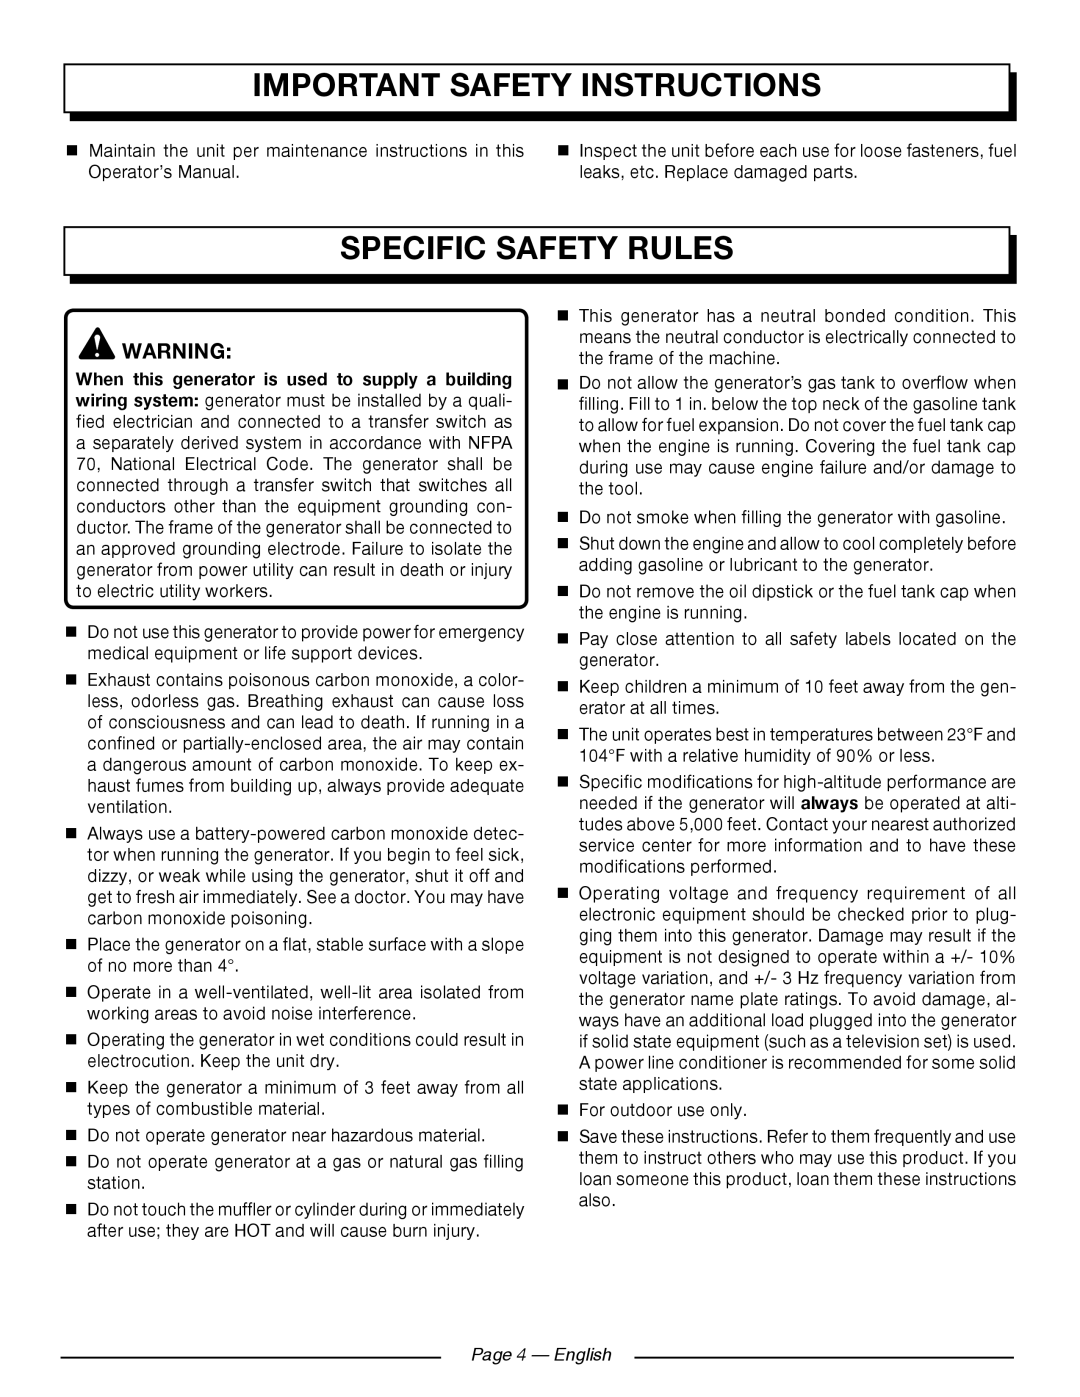 Homelite UT902250 manuel dutilisation Specific Safety Rules, Page 4 — English, Important Safety Instructions 